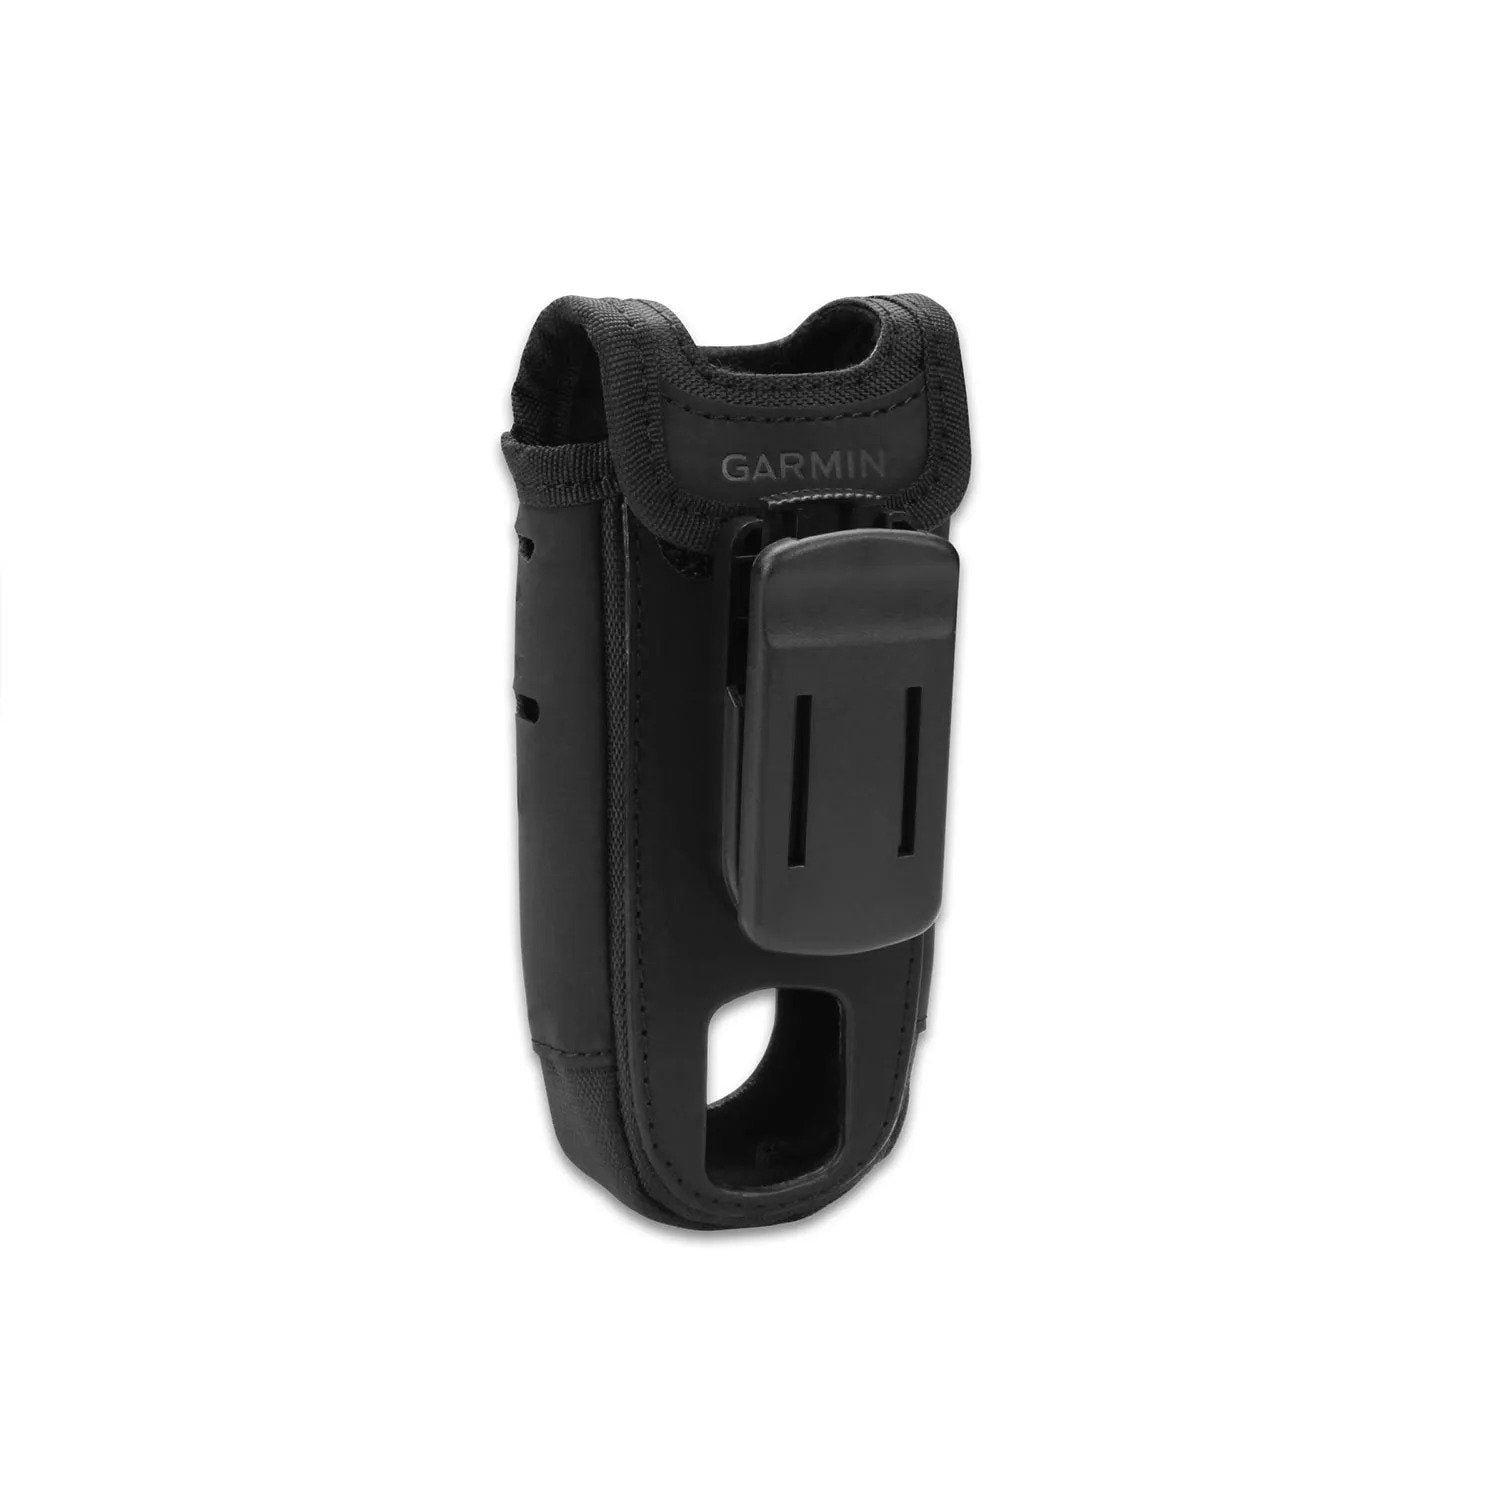 Garmin Delta Carrying Case with Clip Back View